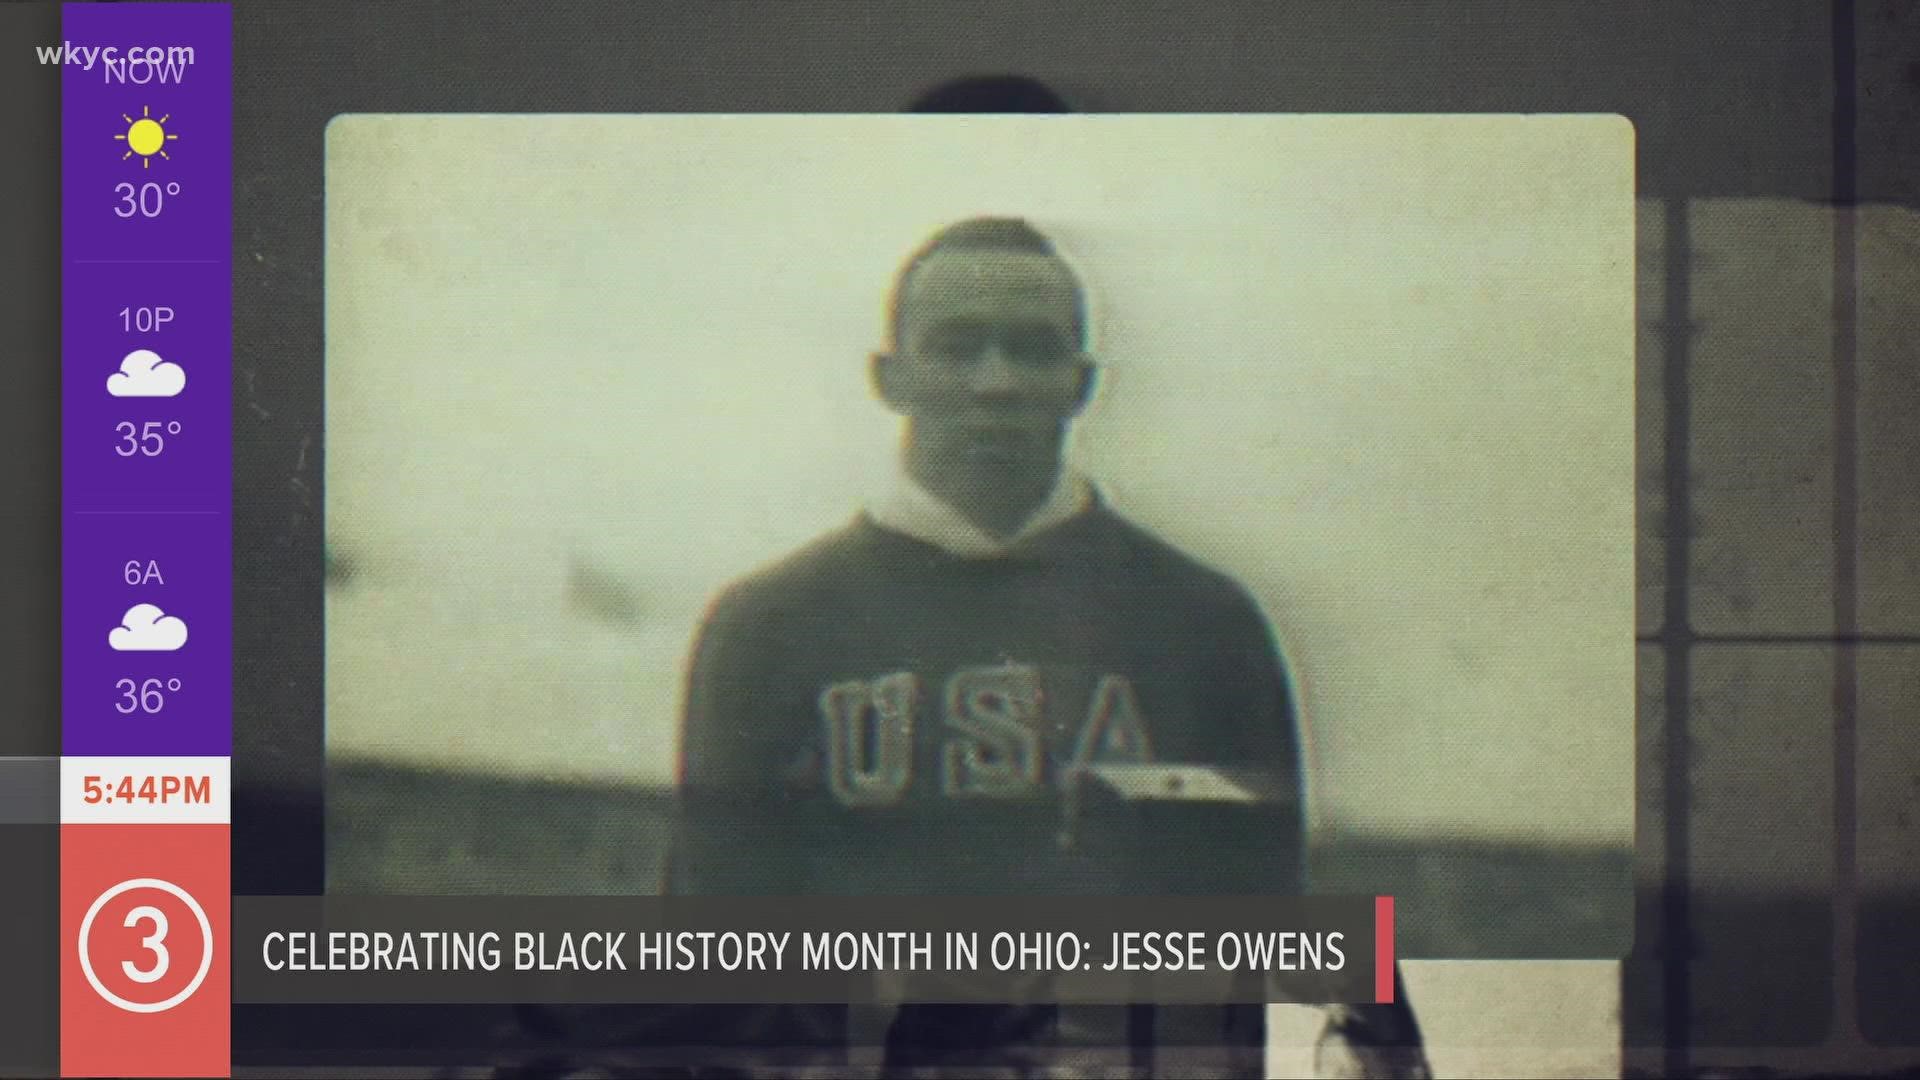 Nicknamed the "Buckeye Bullet" Owens put the world on notice with his athleticism, and delivered a strong rebuke to Hitler's racist myths.